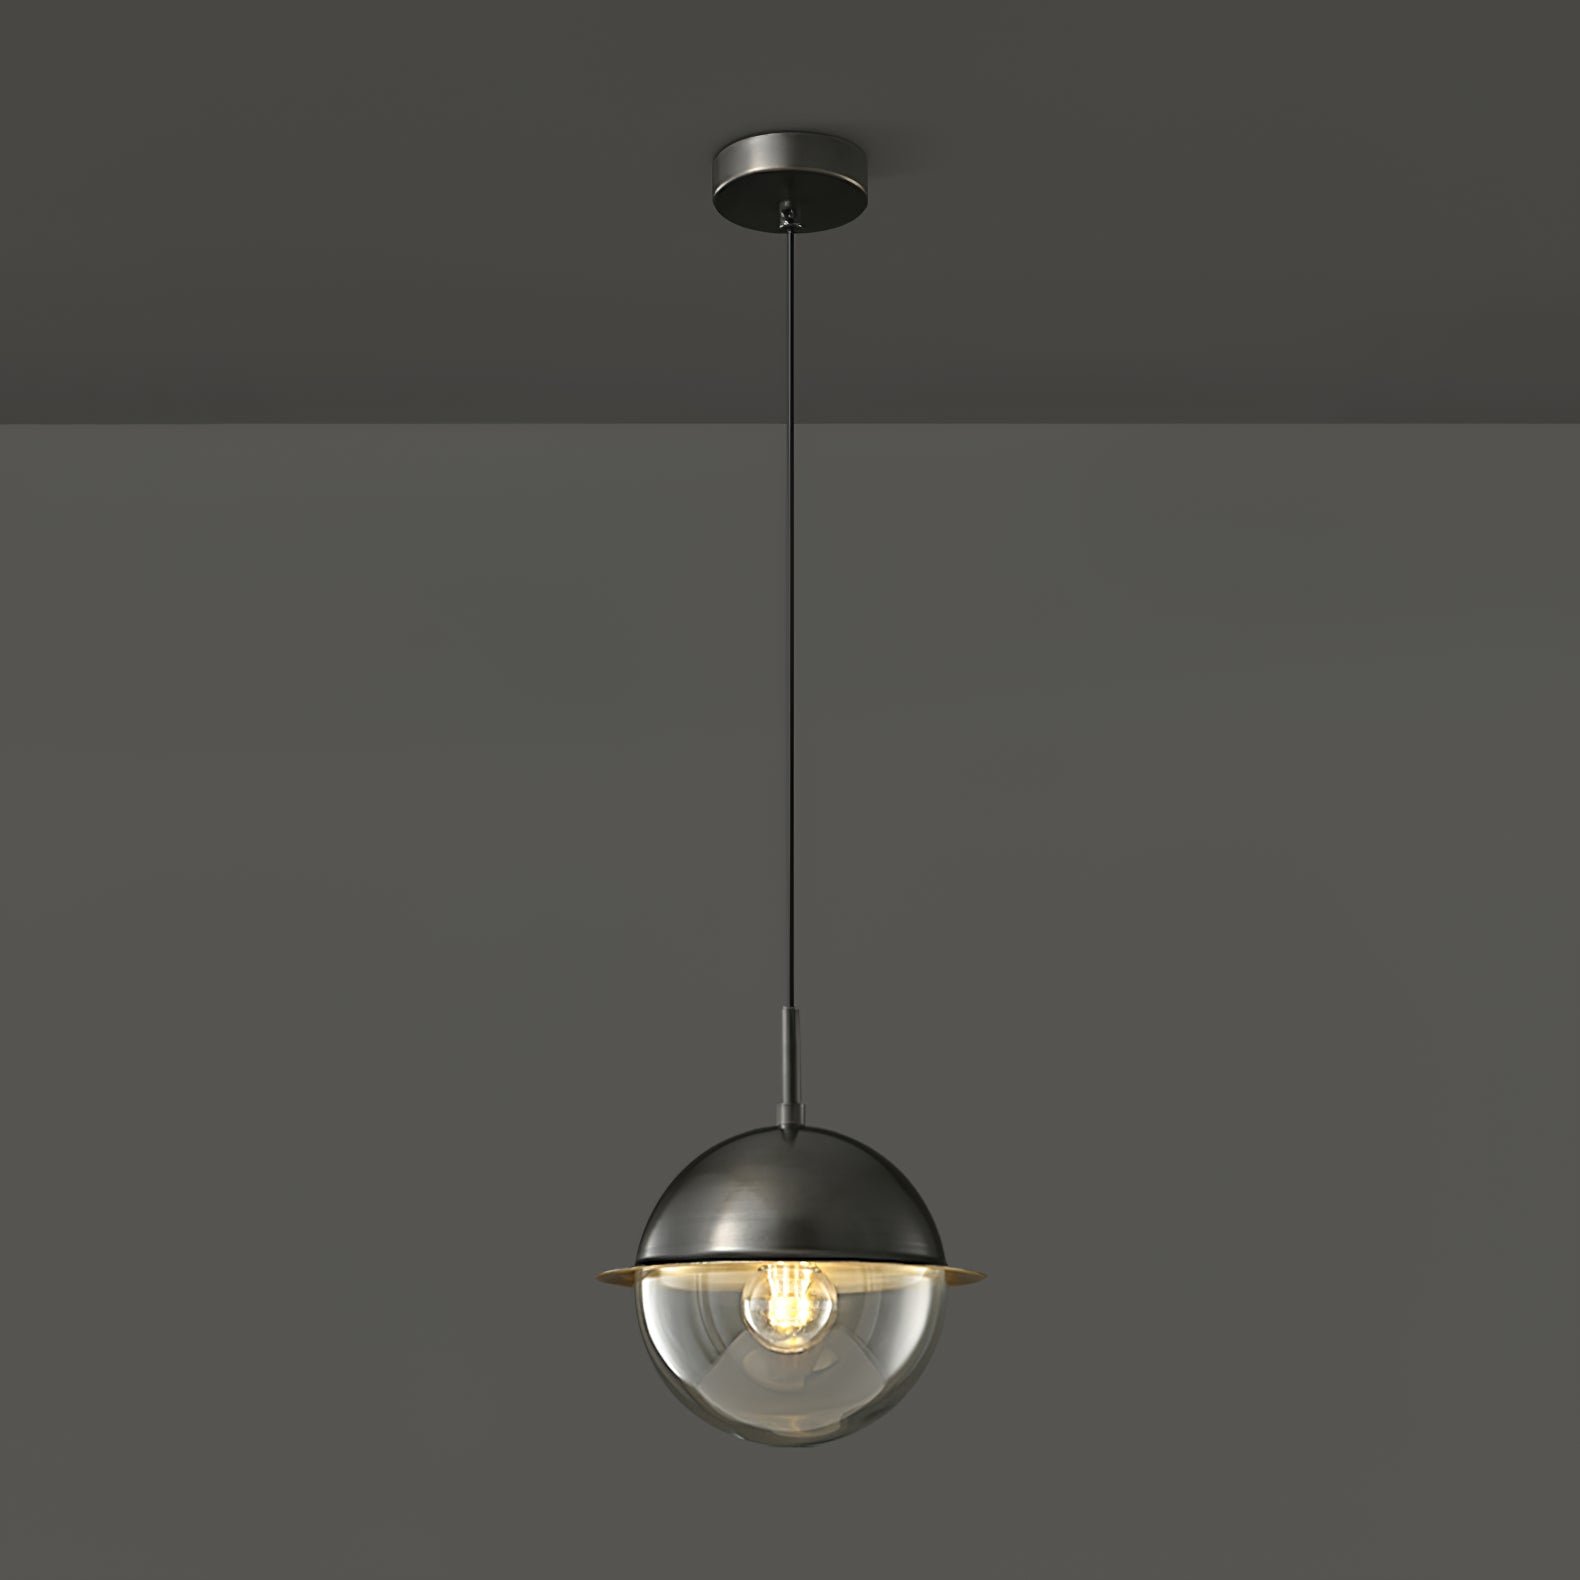 Black Varus Pendant Lamp, with a diameter of 7.1 inches and a height of 9.4 inches (18cm x 24cm)